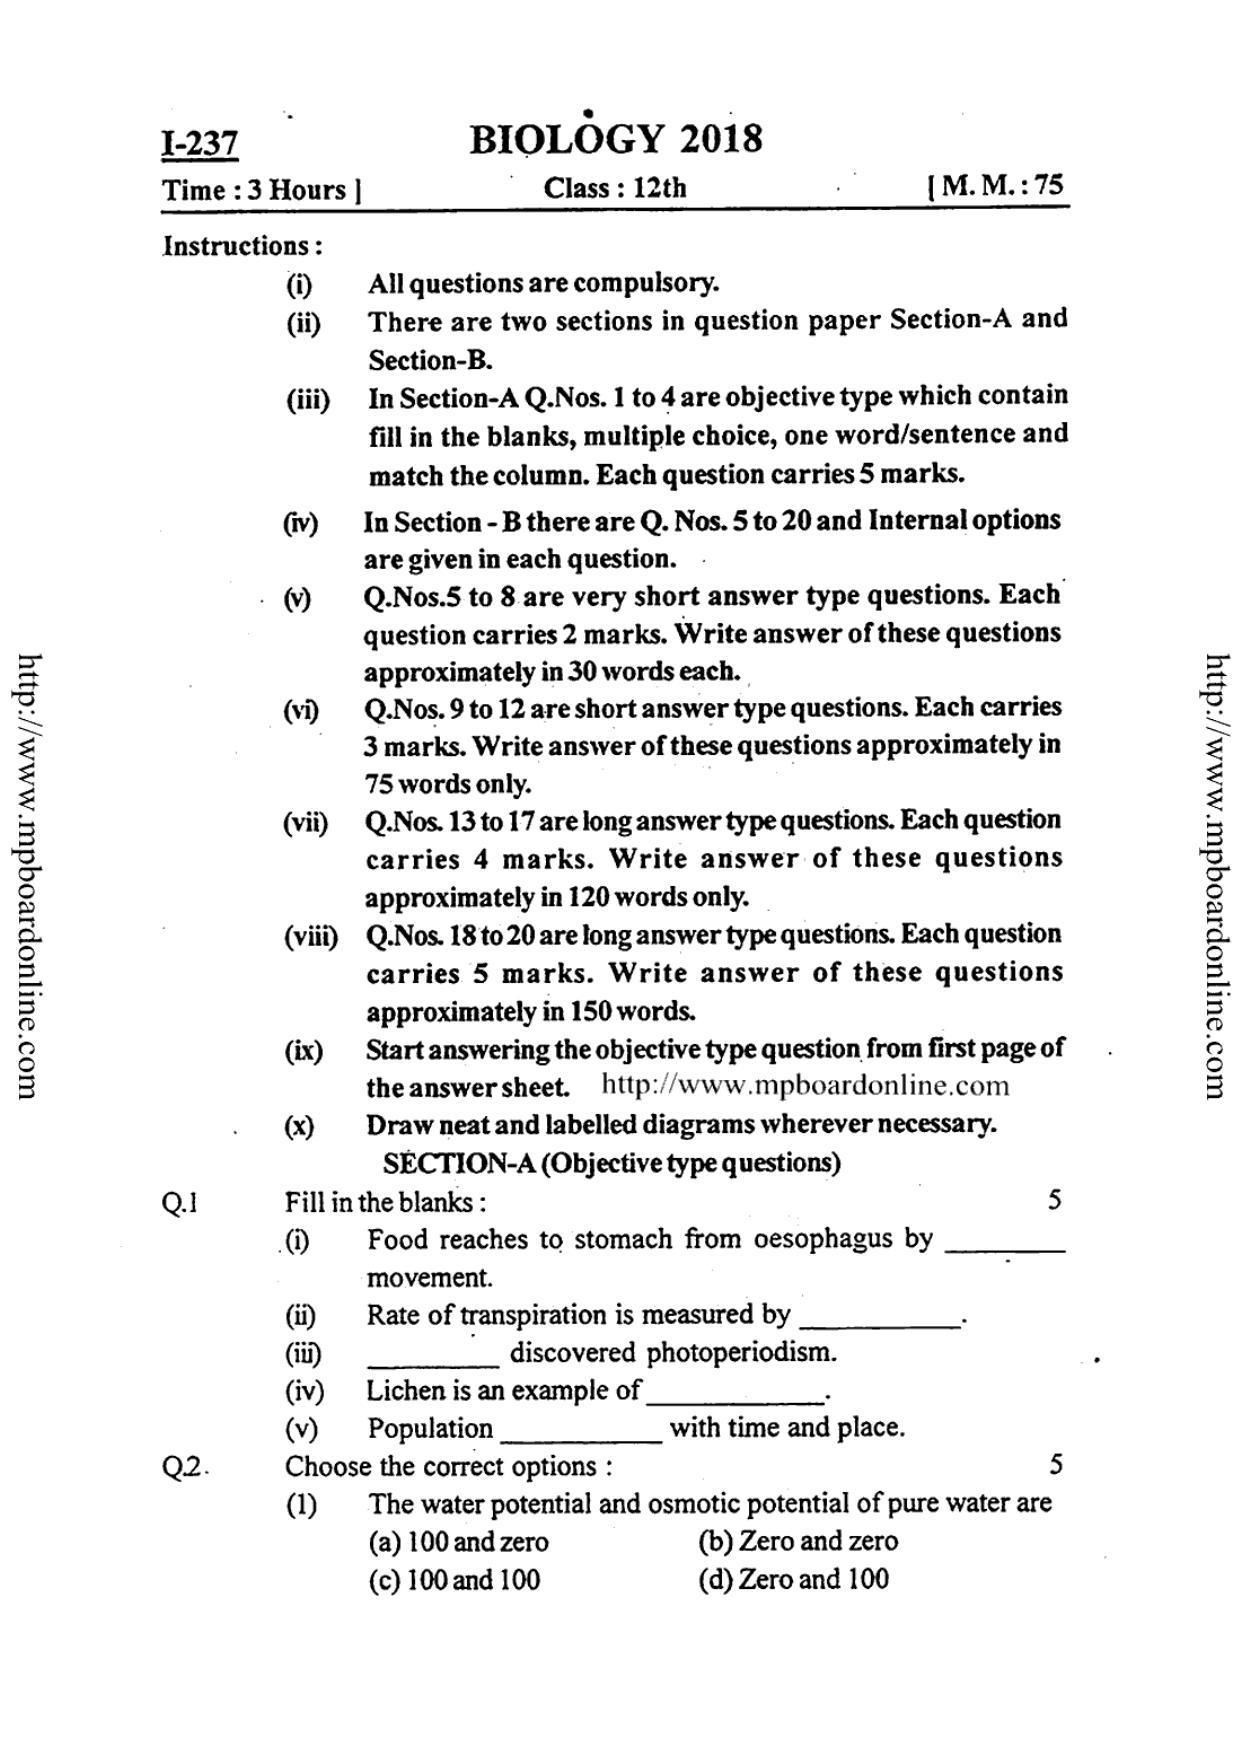 MP Board Class 12 Biology 2018 Question Paper - Page 4